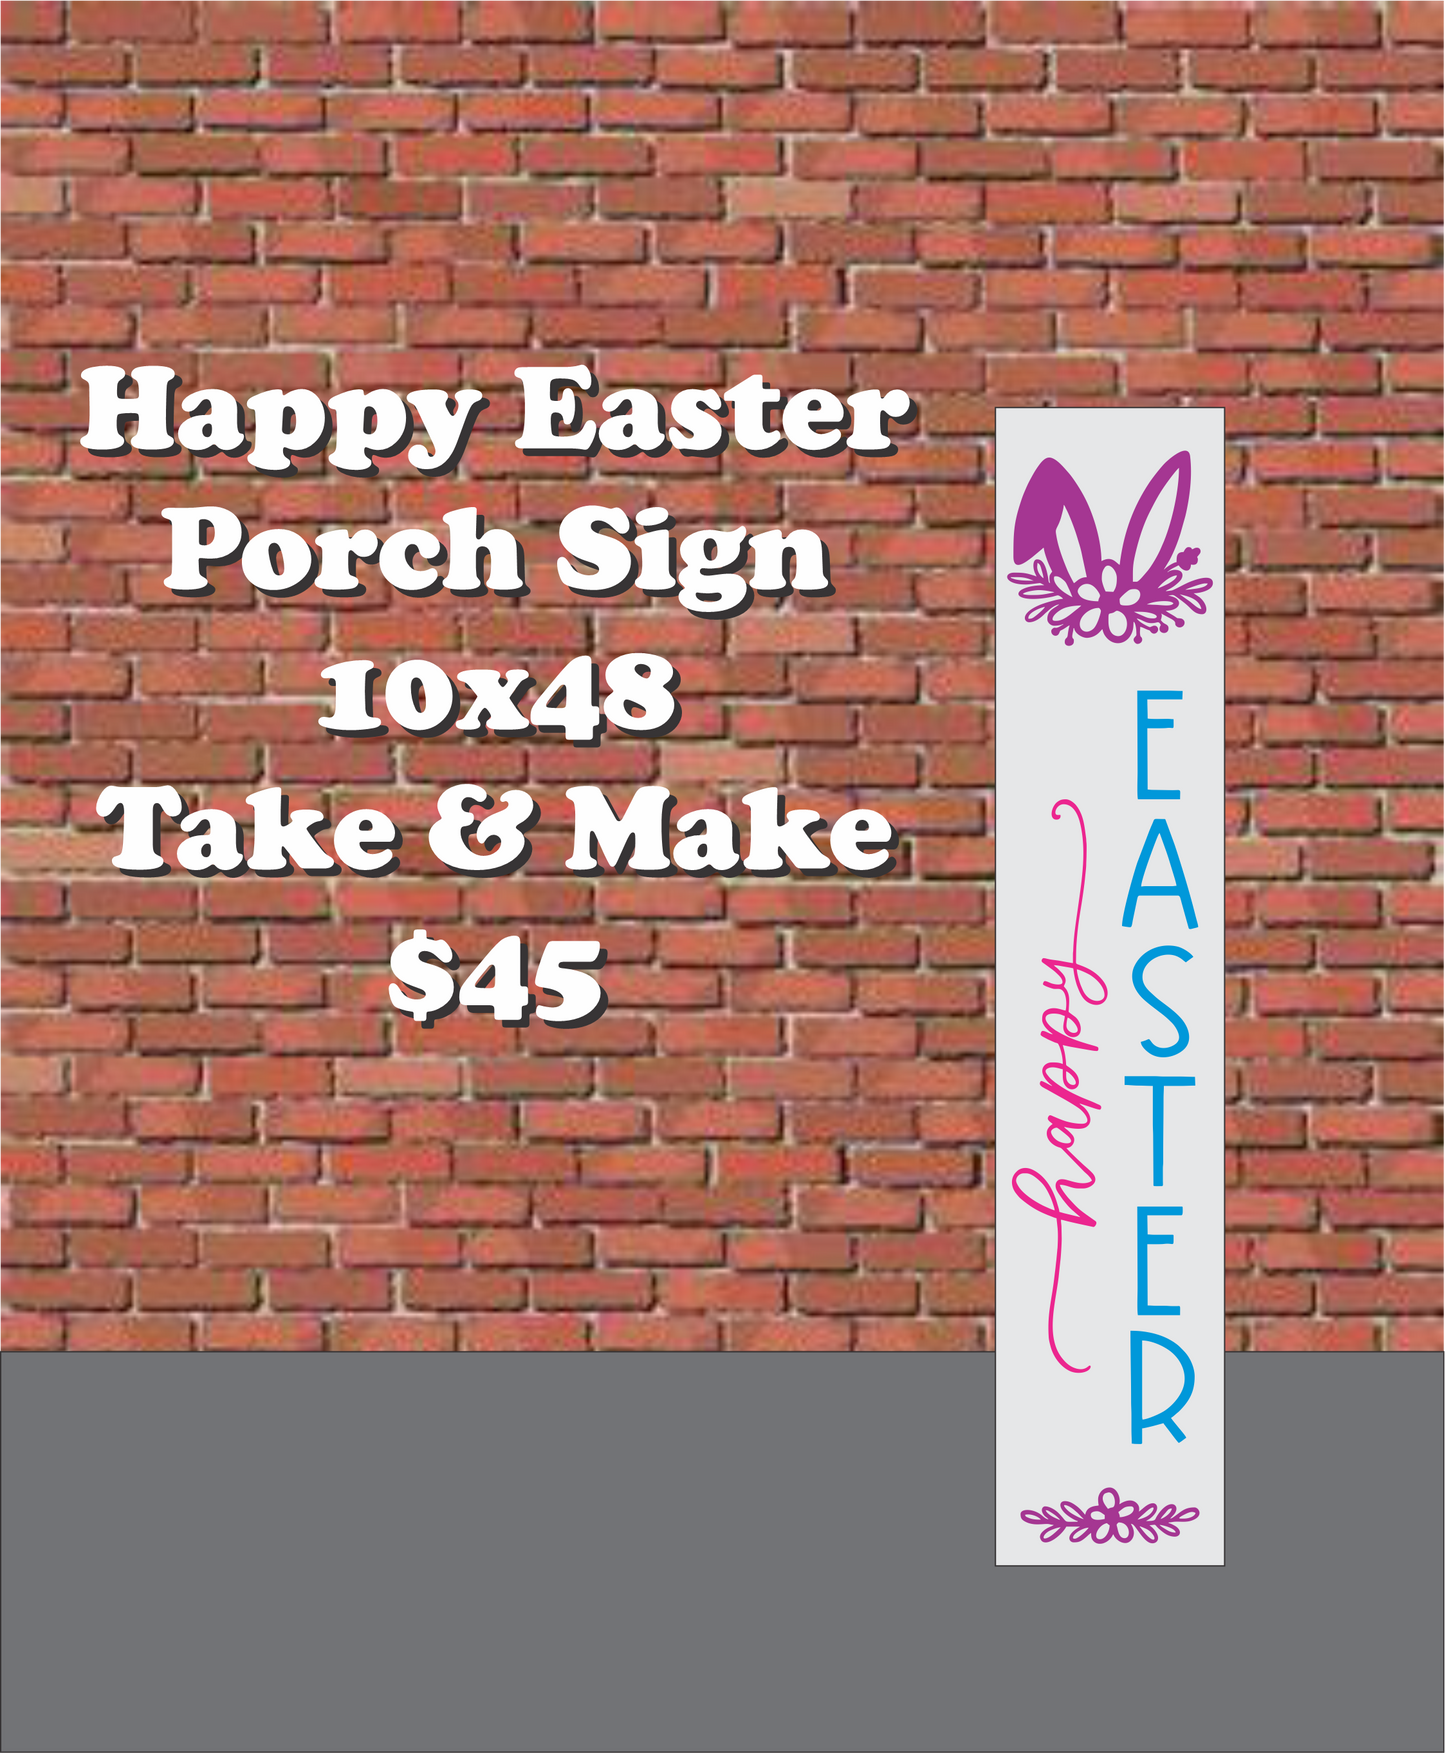 Happy Easter Bunny Ears Porch Sign Kit